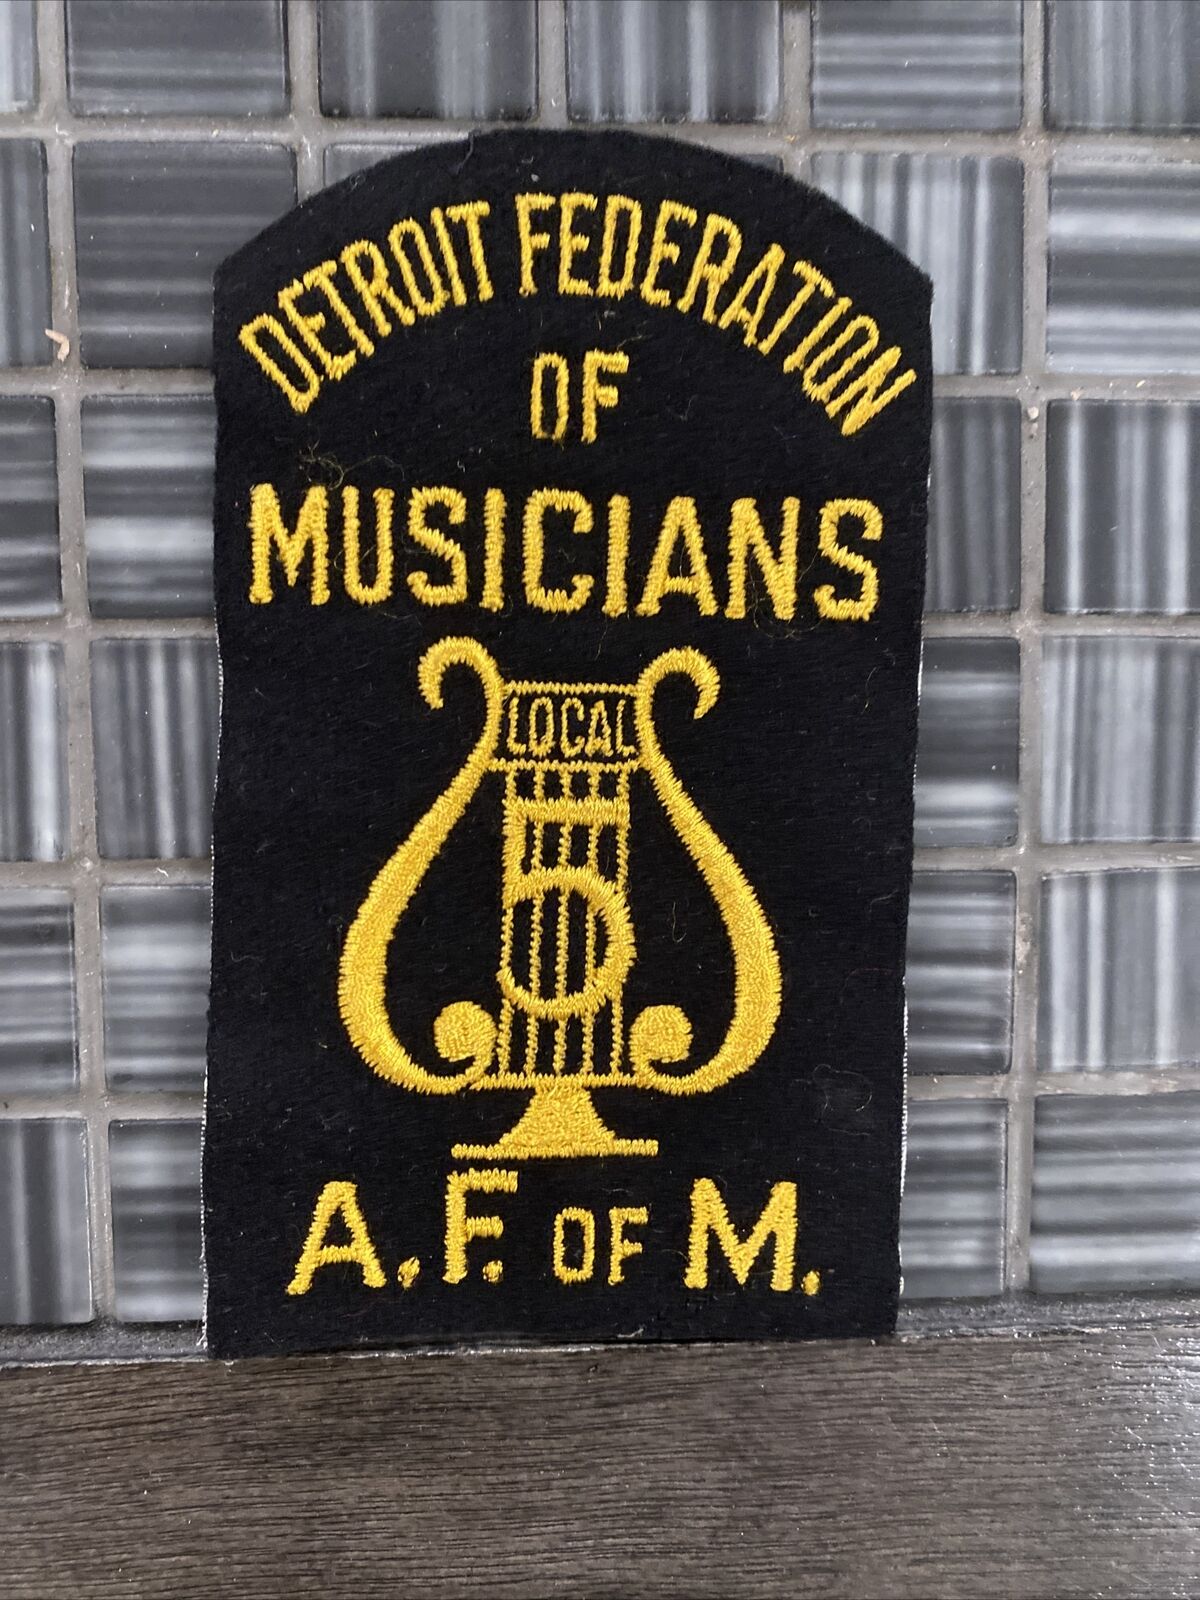 Detroit Federation of Musicians A.F. of M. Patch 1940s?